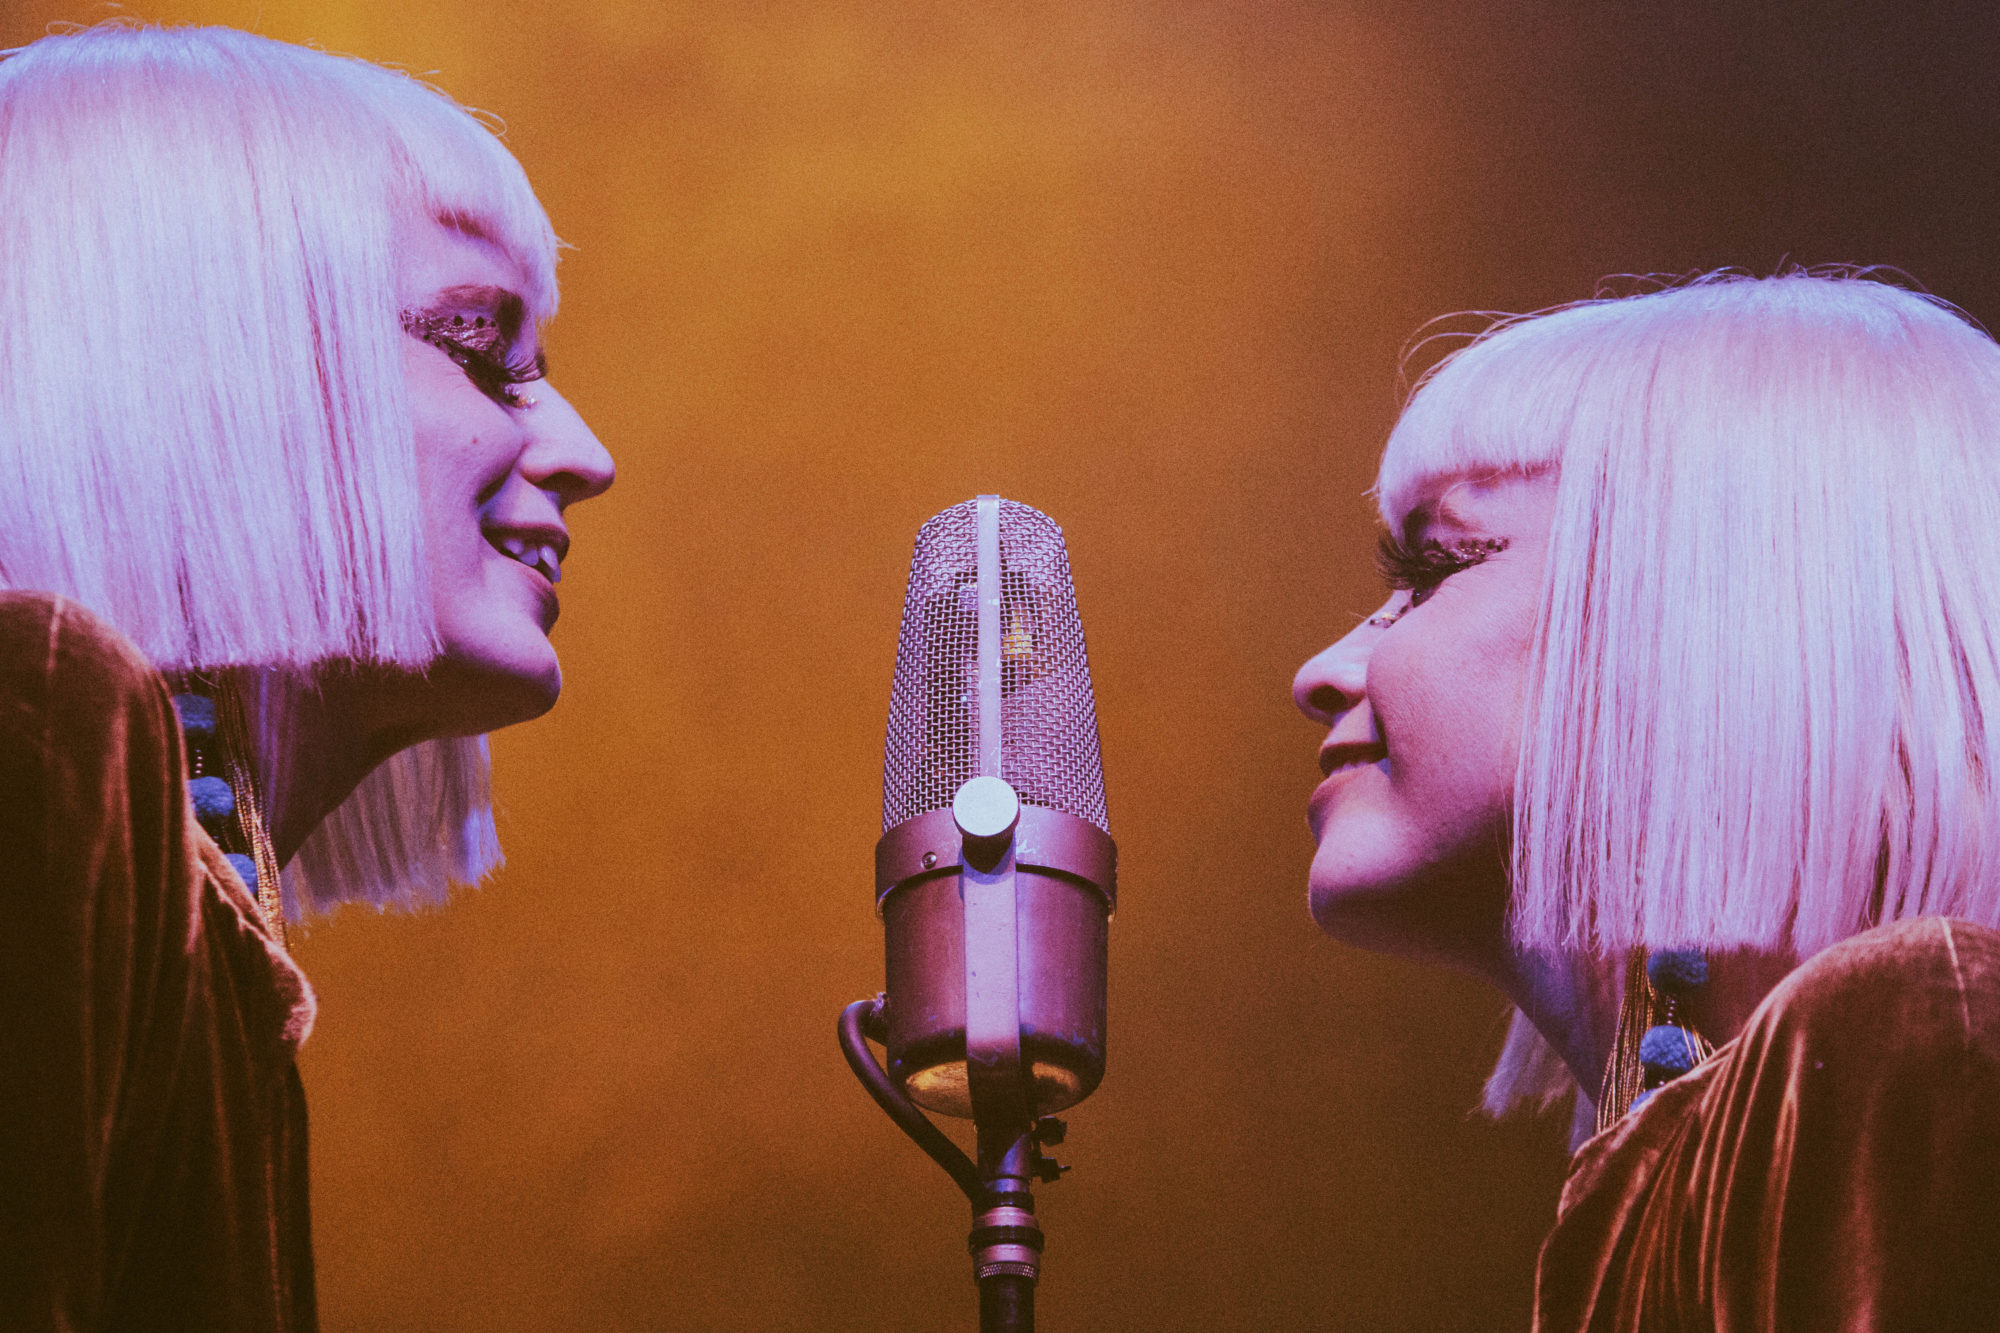 Lucius acoustic tour, Love and harmony, Intimate live performance, Substream Magazine, 2000x1340 HD Desktop